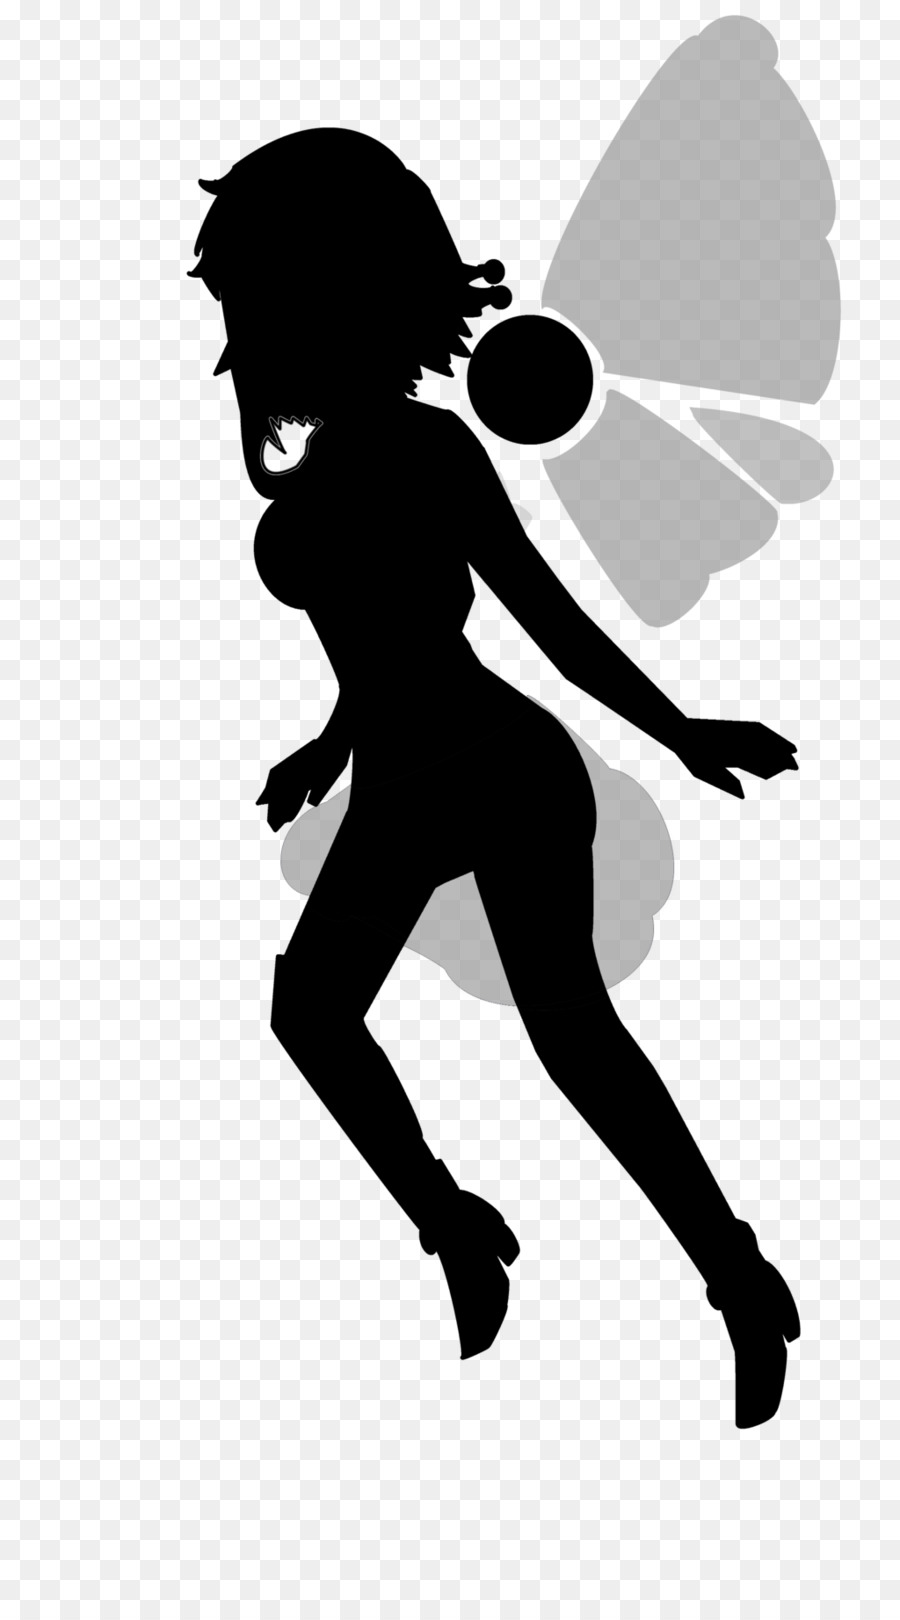 Fairy Silhouette Black Clip art - Fairy png download - 1024*1821 - Free Transparent Fairy png Download.